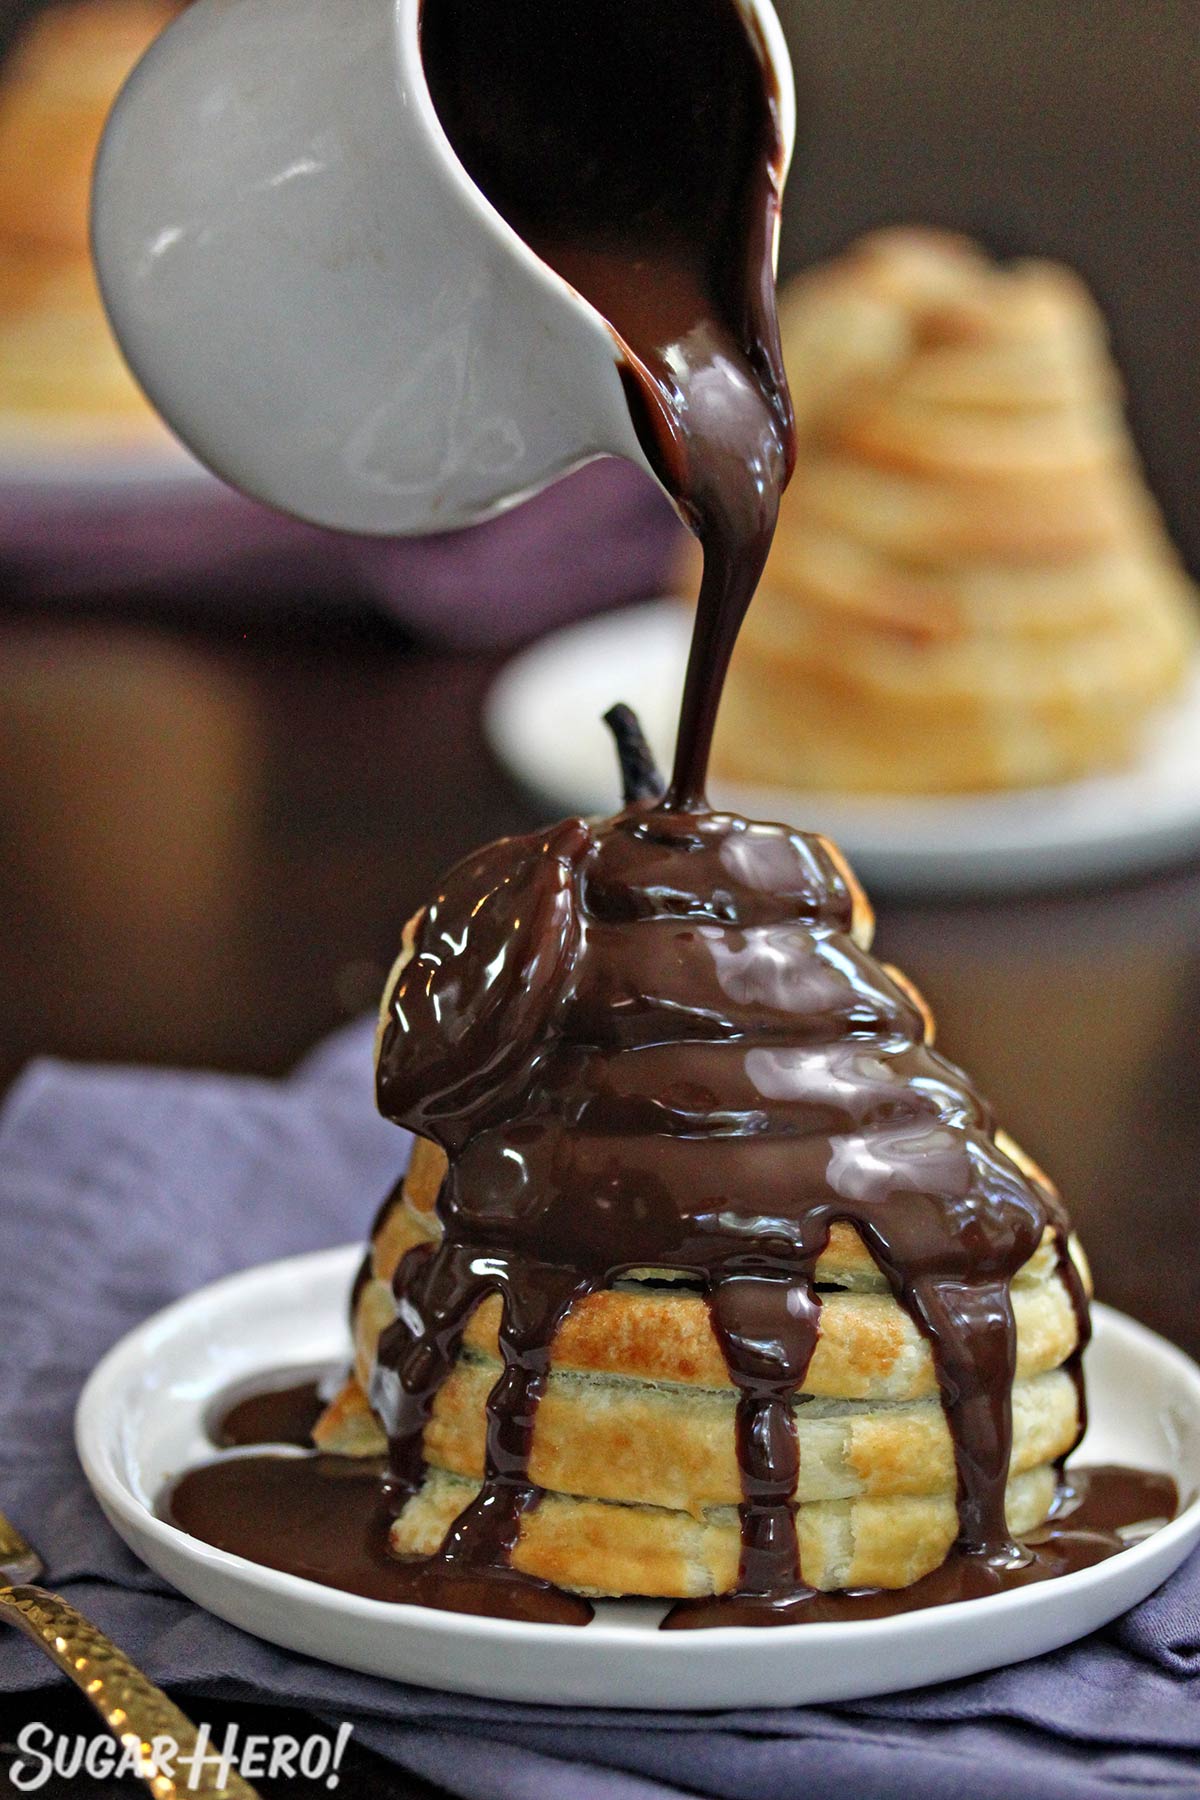 Puff Pastry-Wrapped Pears with Chocolate Espresso Sauce | From SugarHero.com